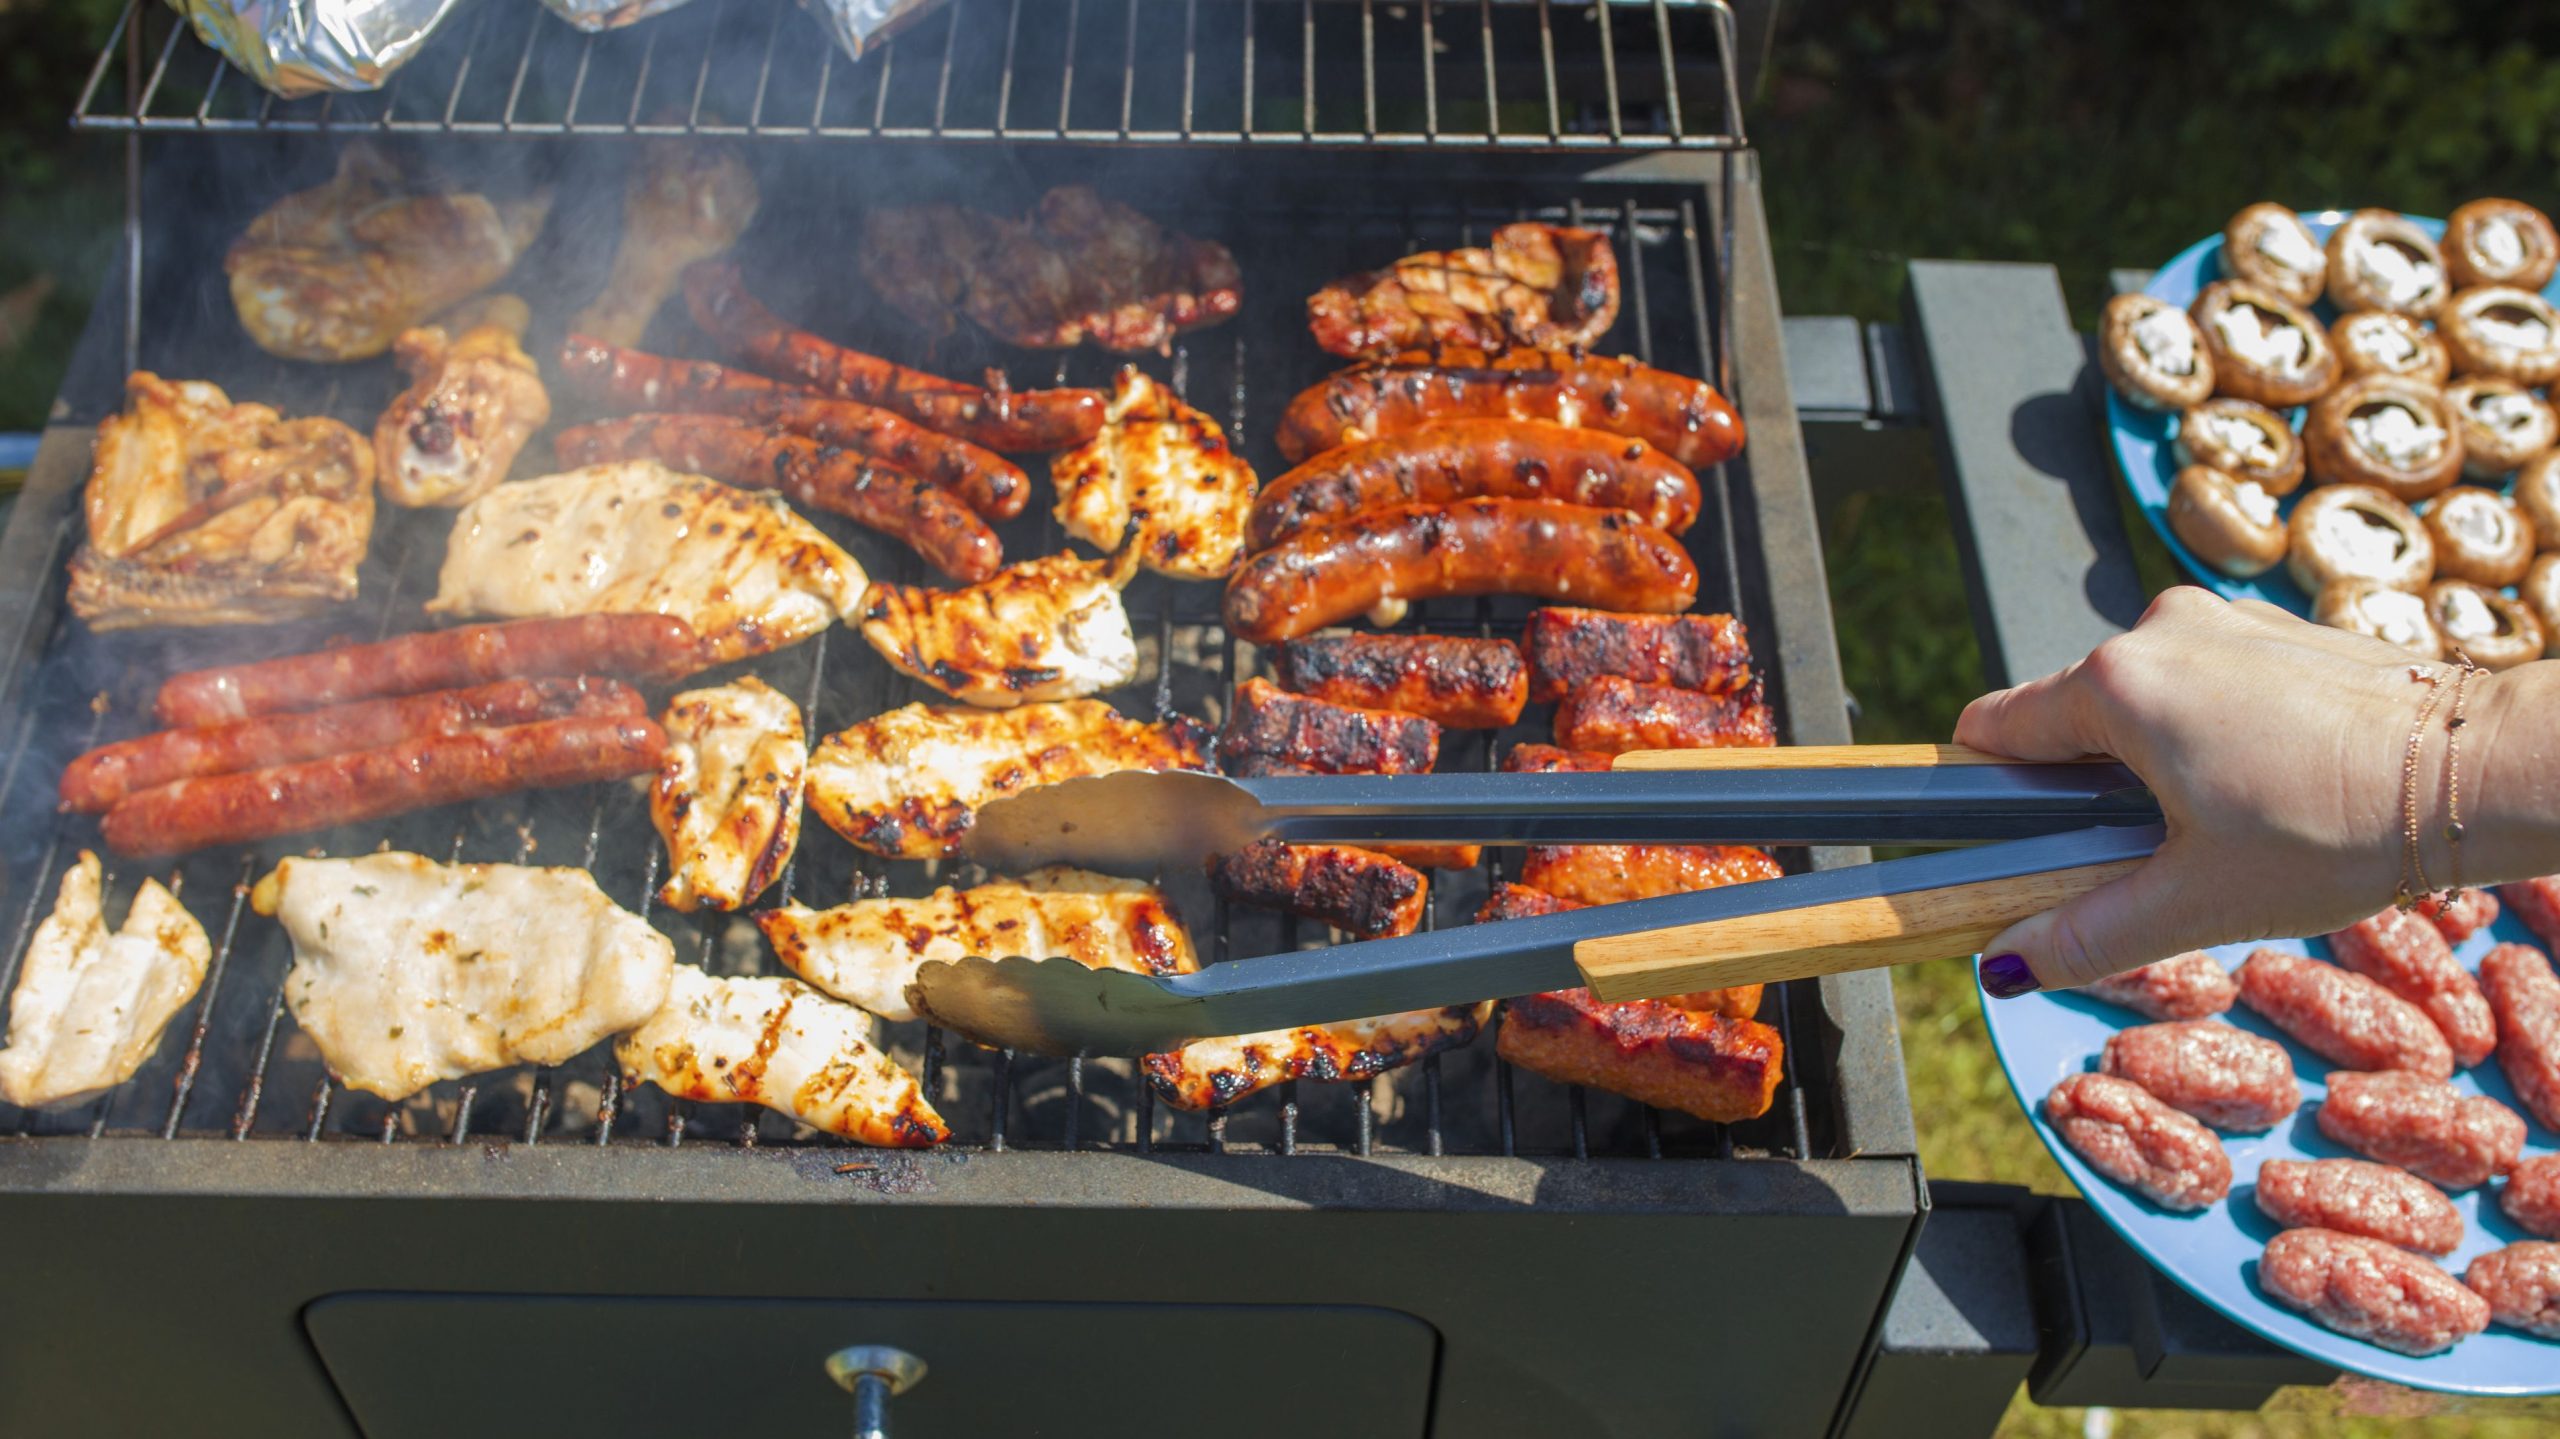 Simple ways to make sure your grill is
actually being used